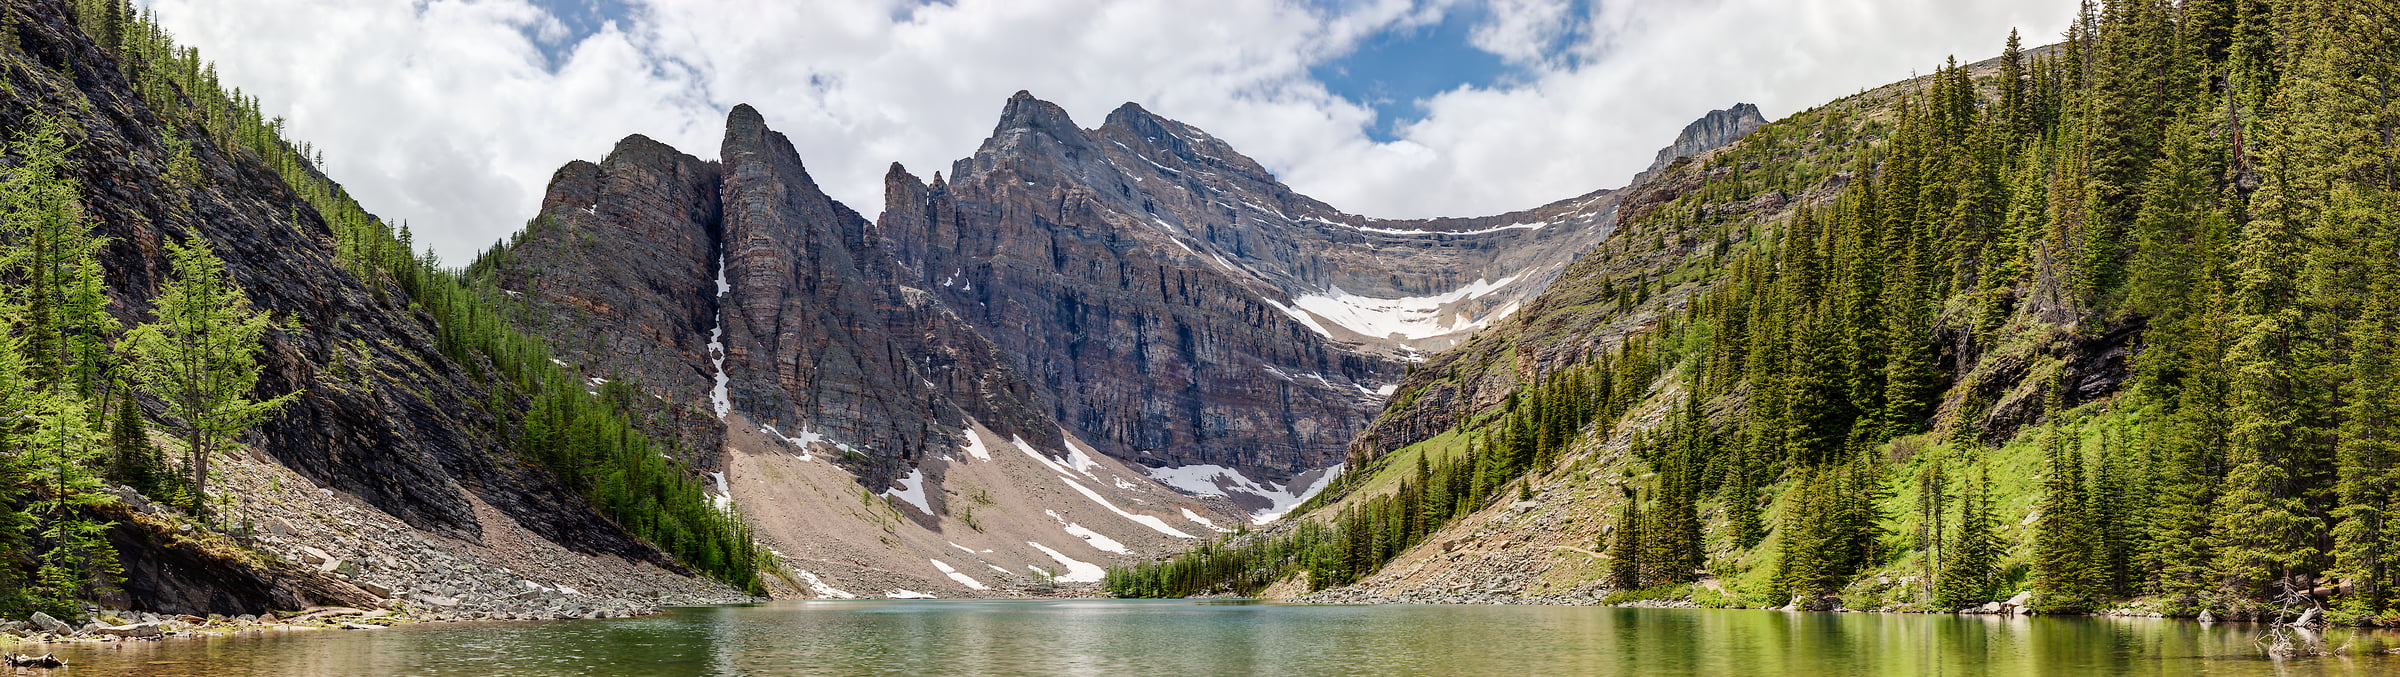 2,783 megapixels! A very high resolution, large-format VAST photo print of a mountain and a lake that would be good as a wallpaper; landscape photograph created by John Freeman in Lake Agnes, Banff National Park, Alberta, Canada.